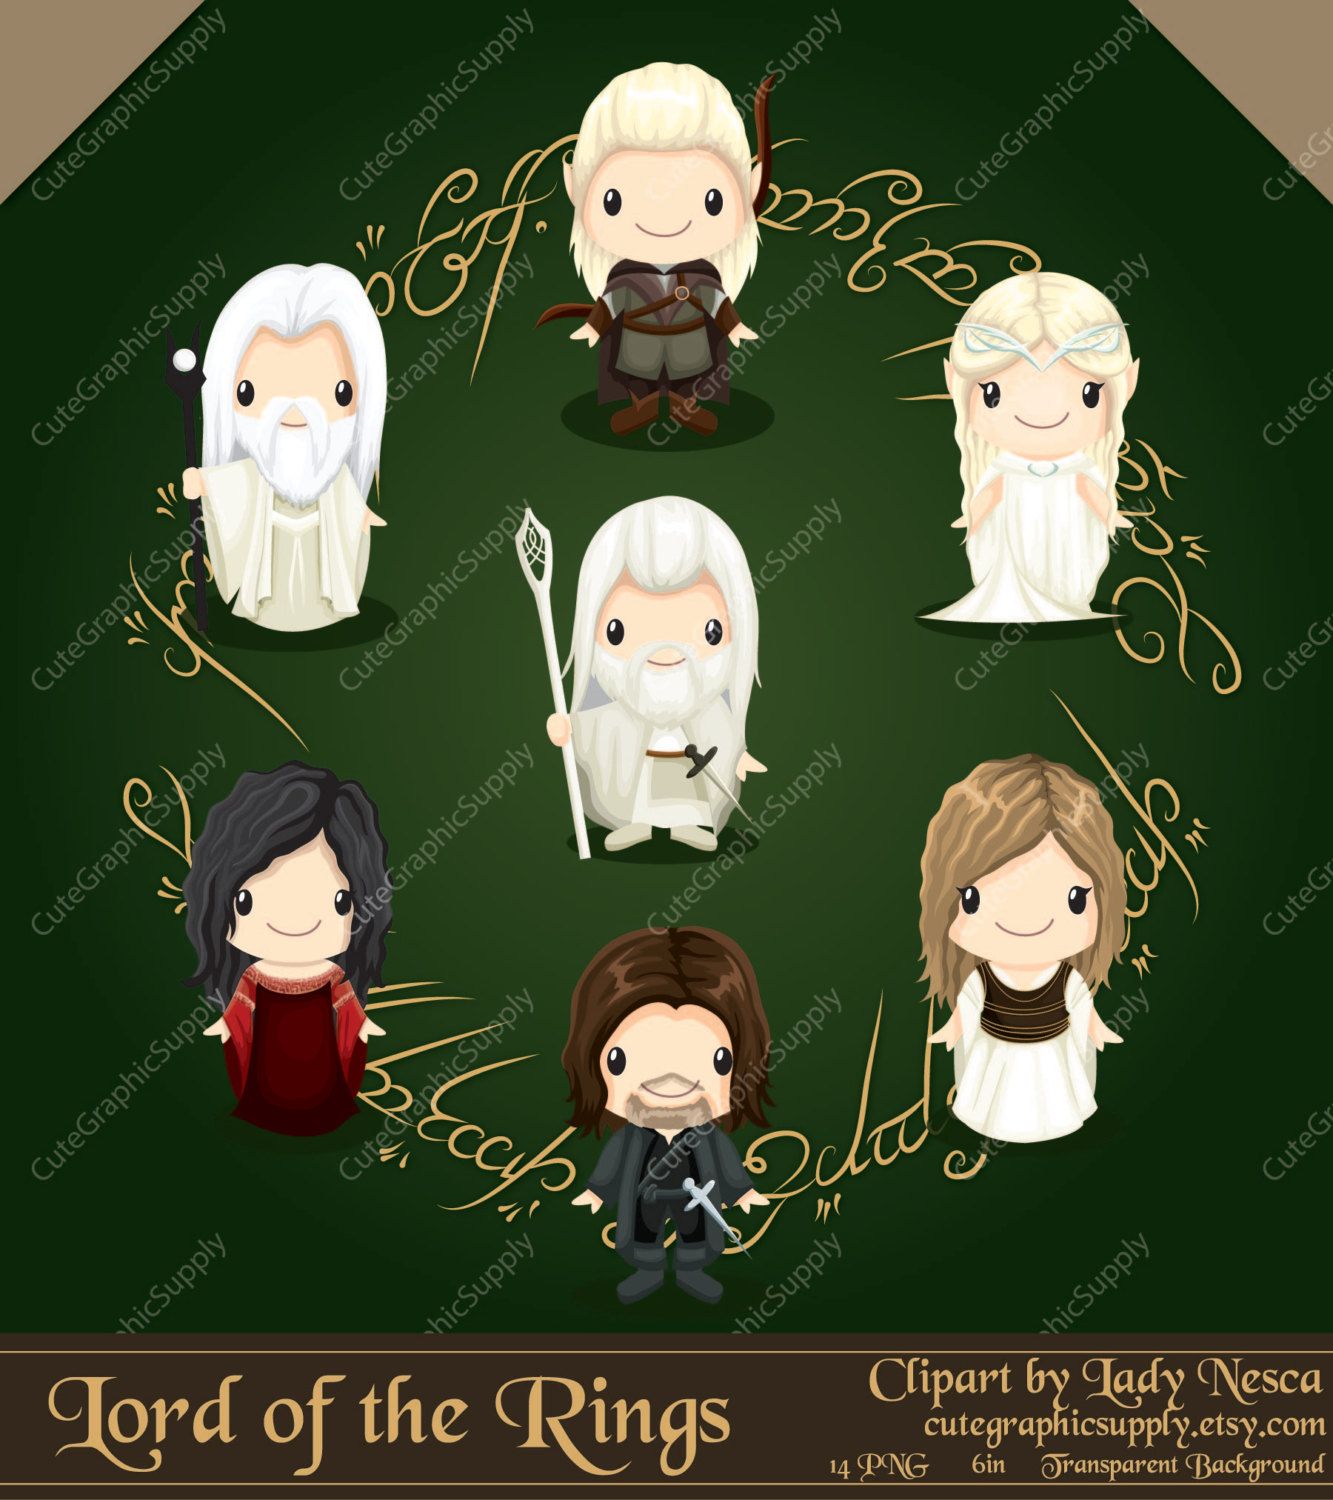 Lord of the Rings inspired clipart hobbit by CuteGraphicSupply